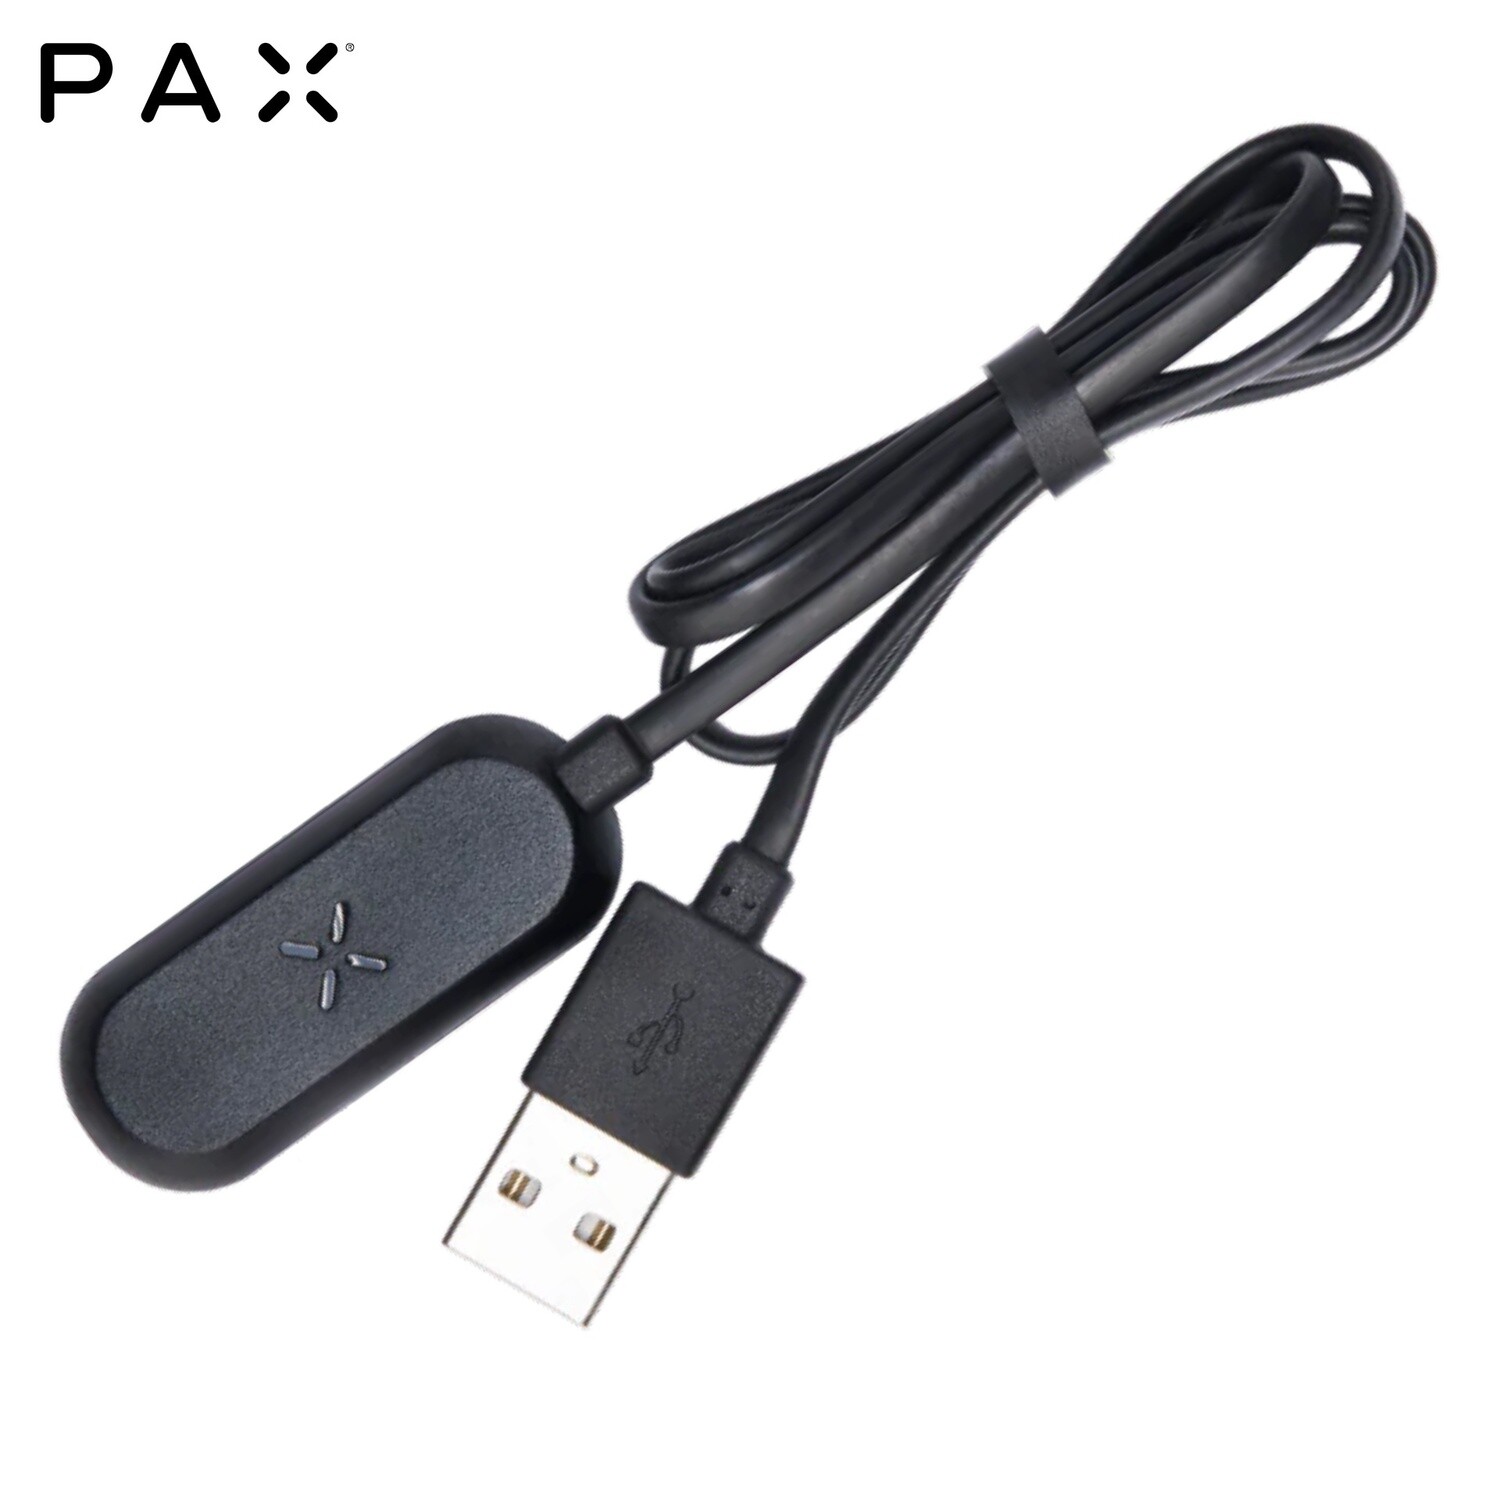 PAX® Charger